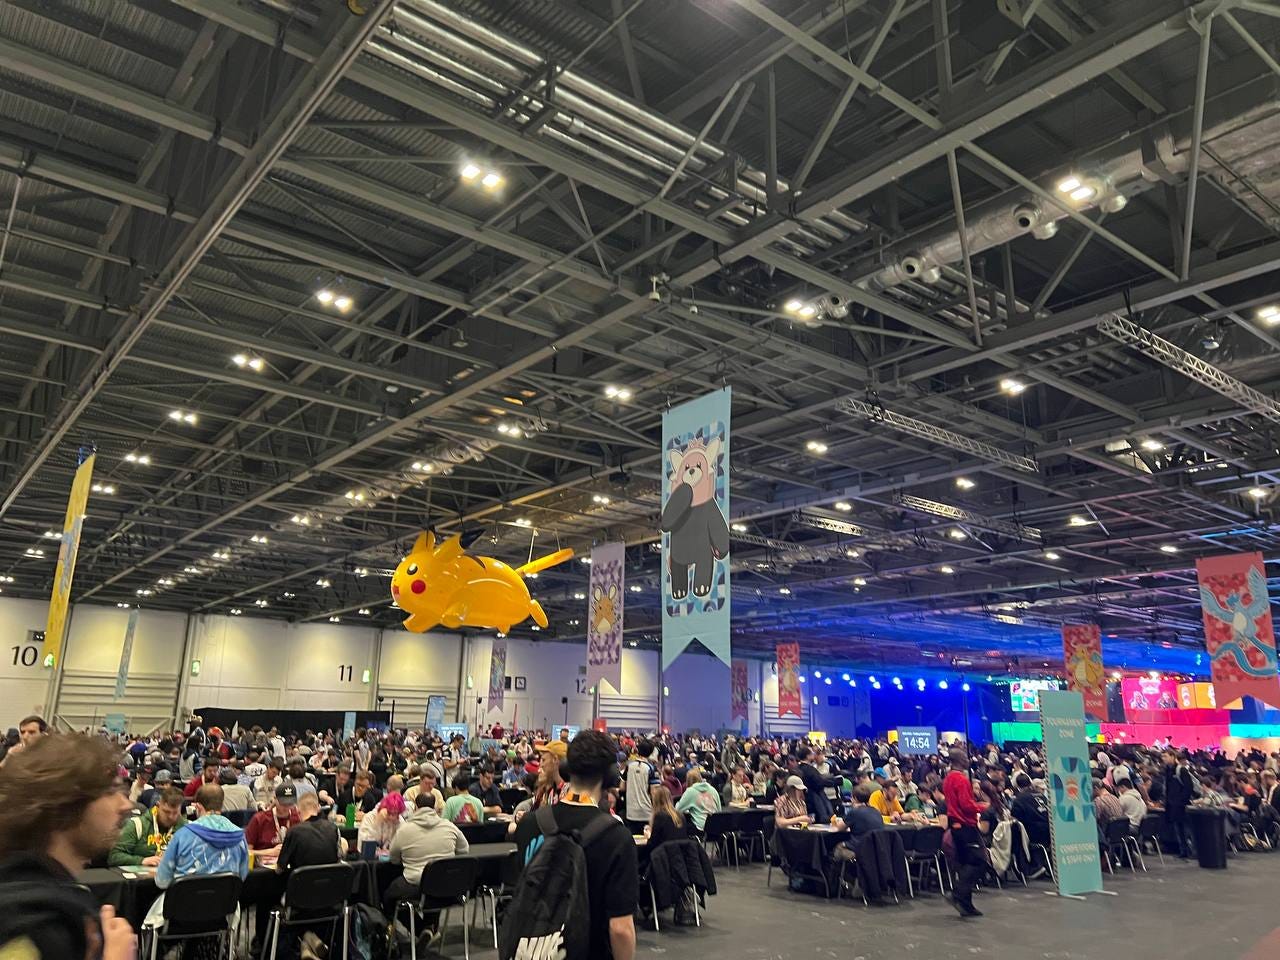 Attendees at the ExCeL convention centre in London, United Kingdom